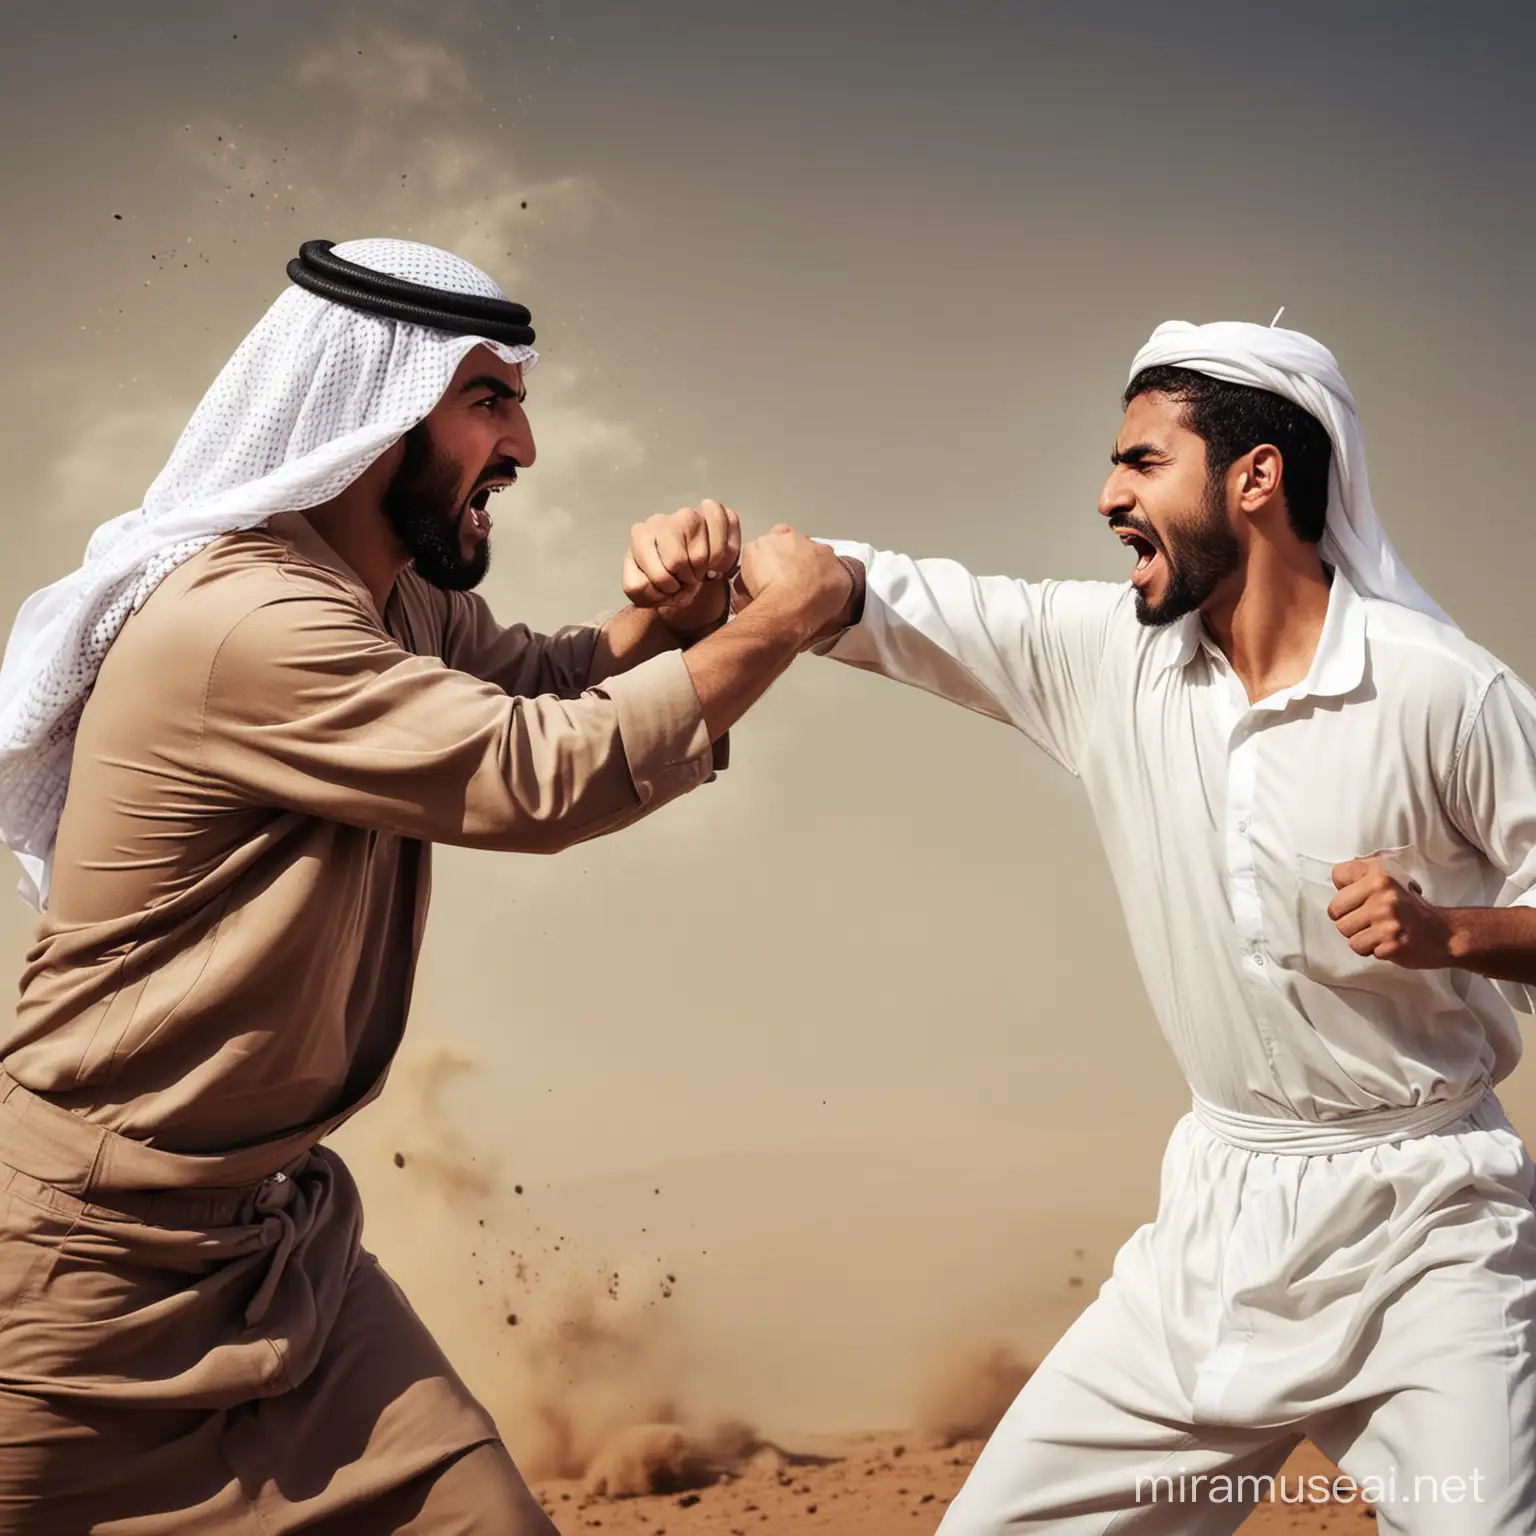 Angry Arab Man Assaulting Another Man in a Fiery Encounter